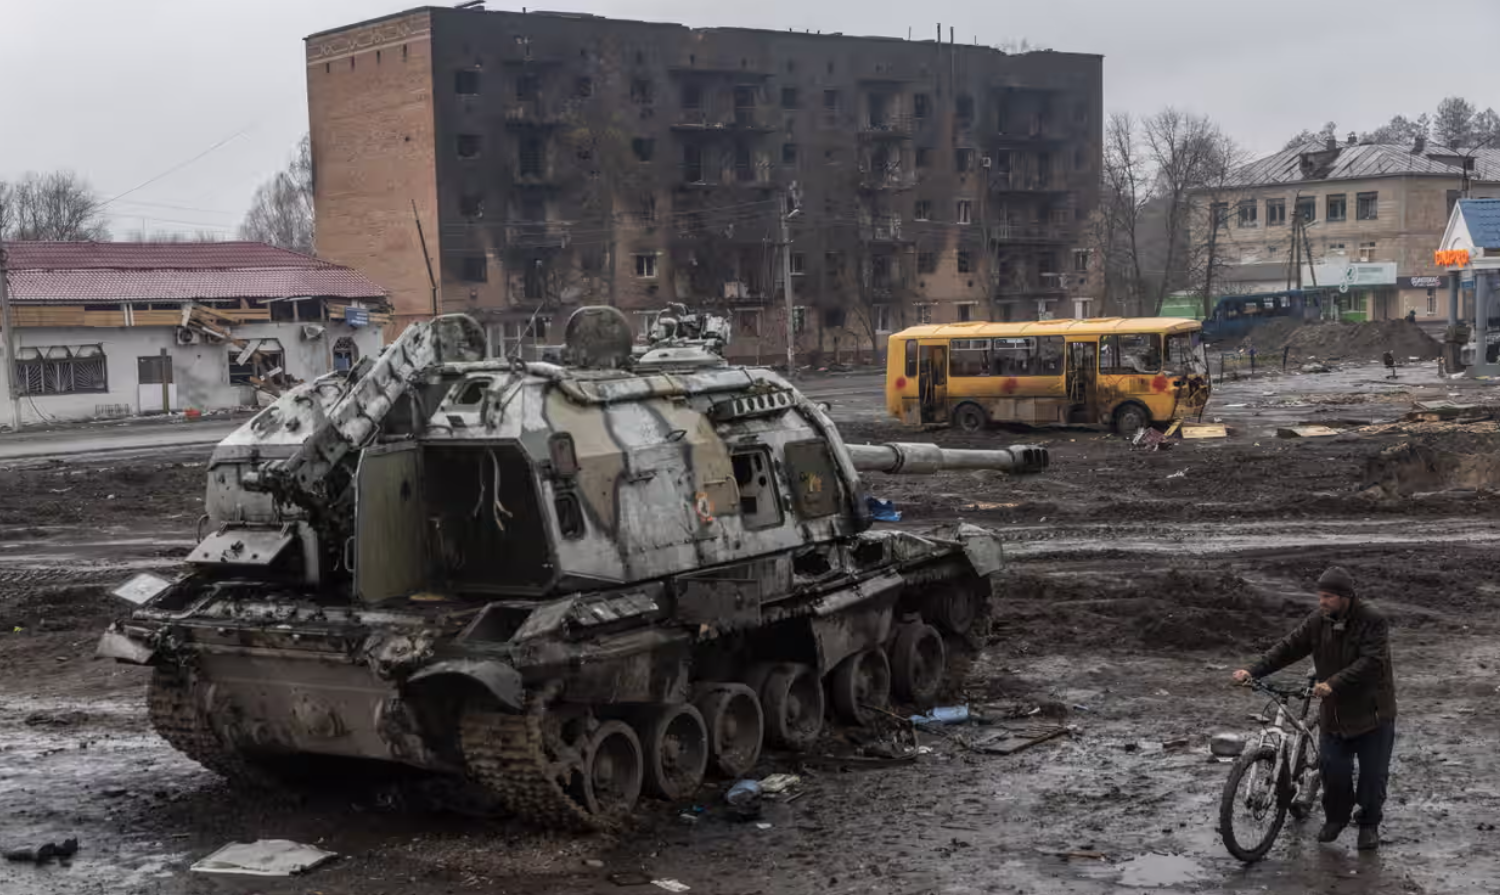 A man pushes his bike through mud and debris past a destroyed Russian self-propelled gun in front of the central train station in Trostianets, Ukraine, in March. Photograph: Chris McGrath/Getty Images